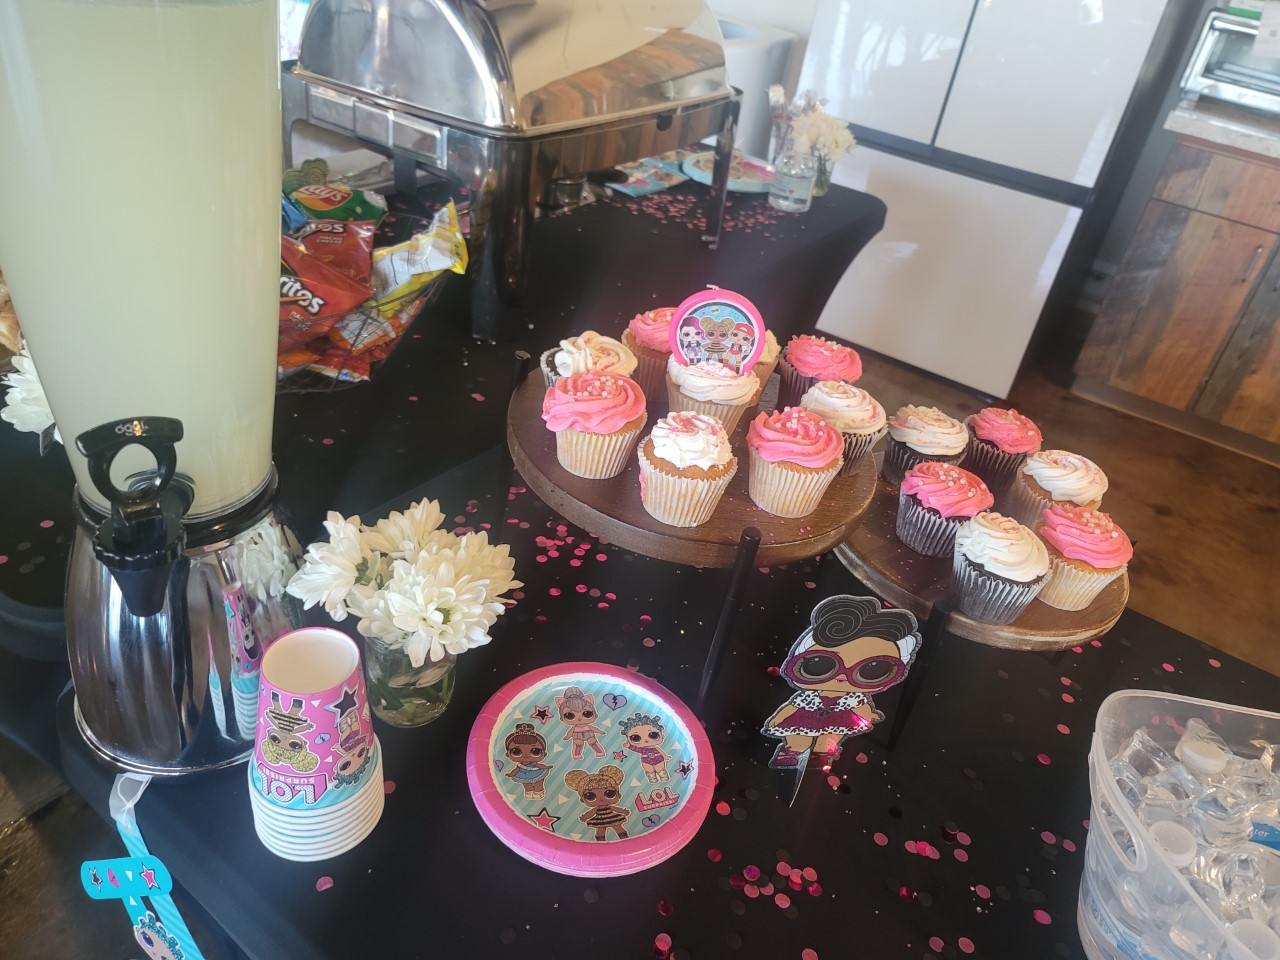 A table with several cups and cupcakes on it.